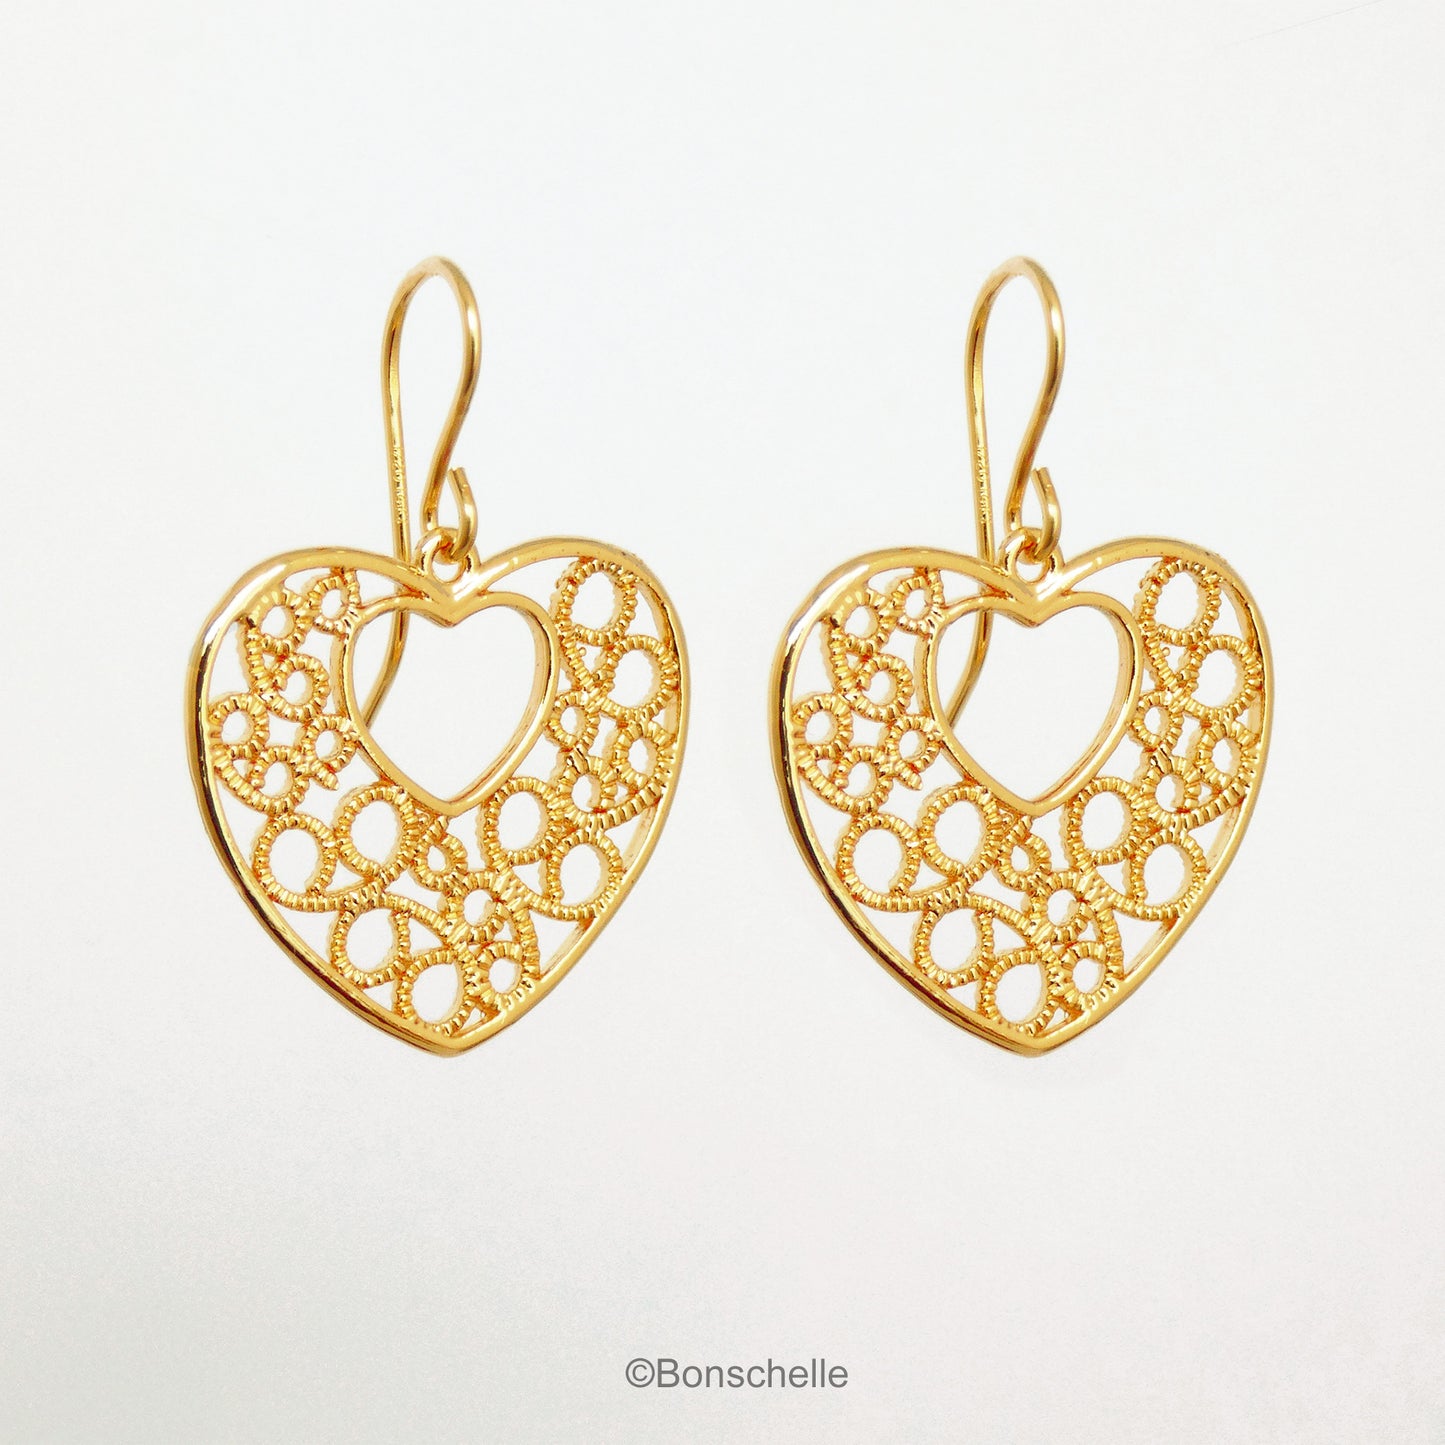 18K gold plated filigree heart earrings with 14K gold filled earwires shown hanging